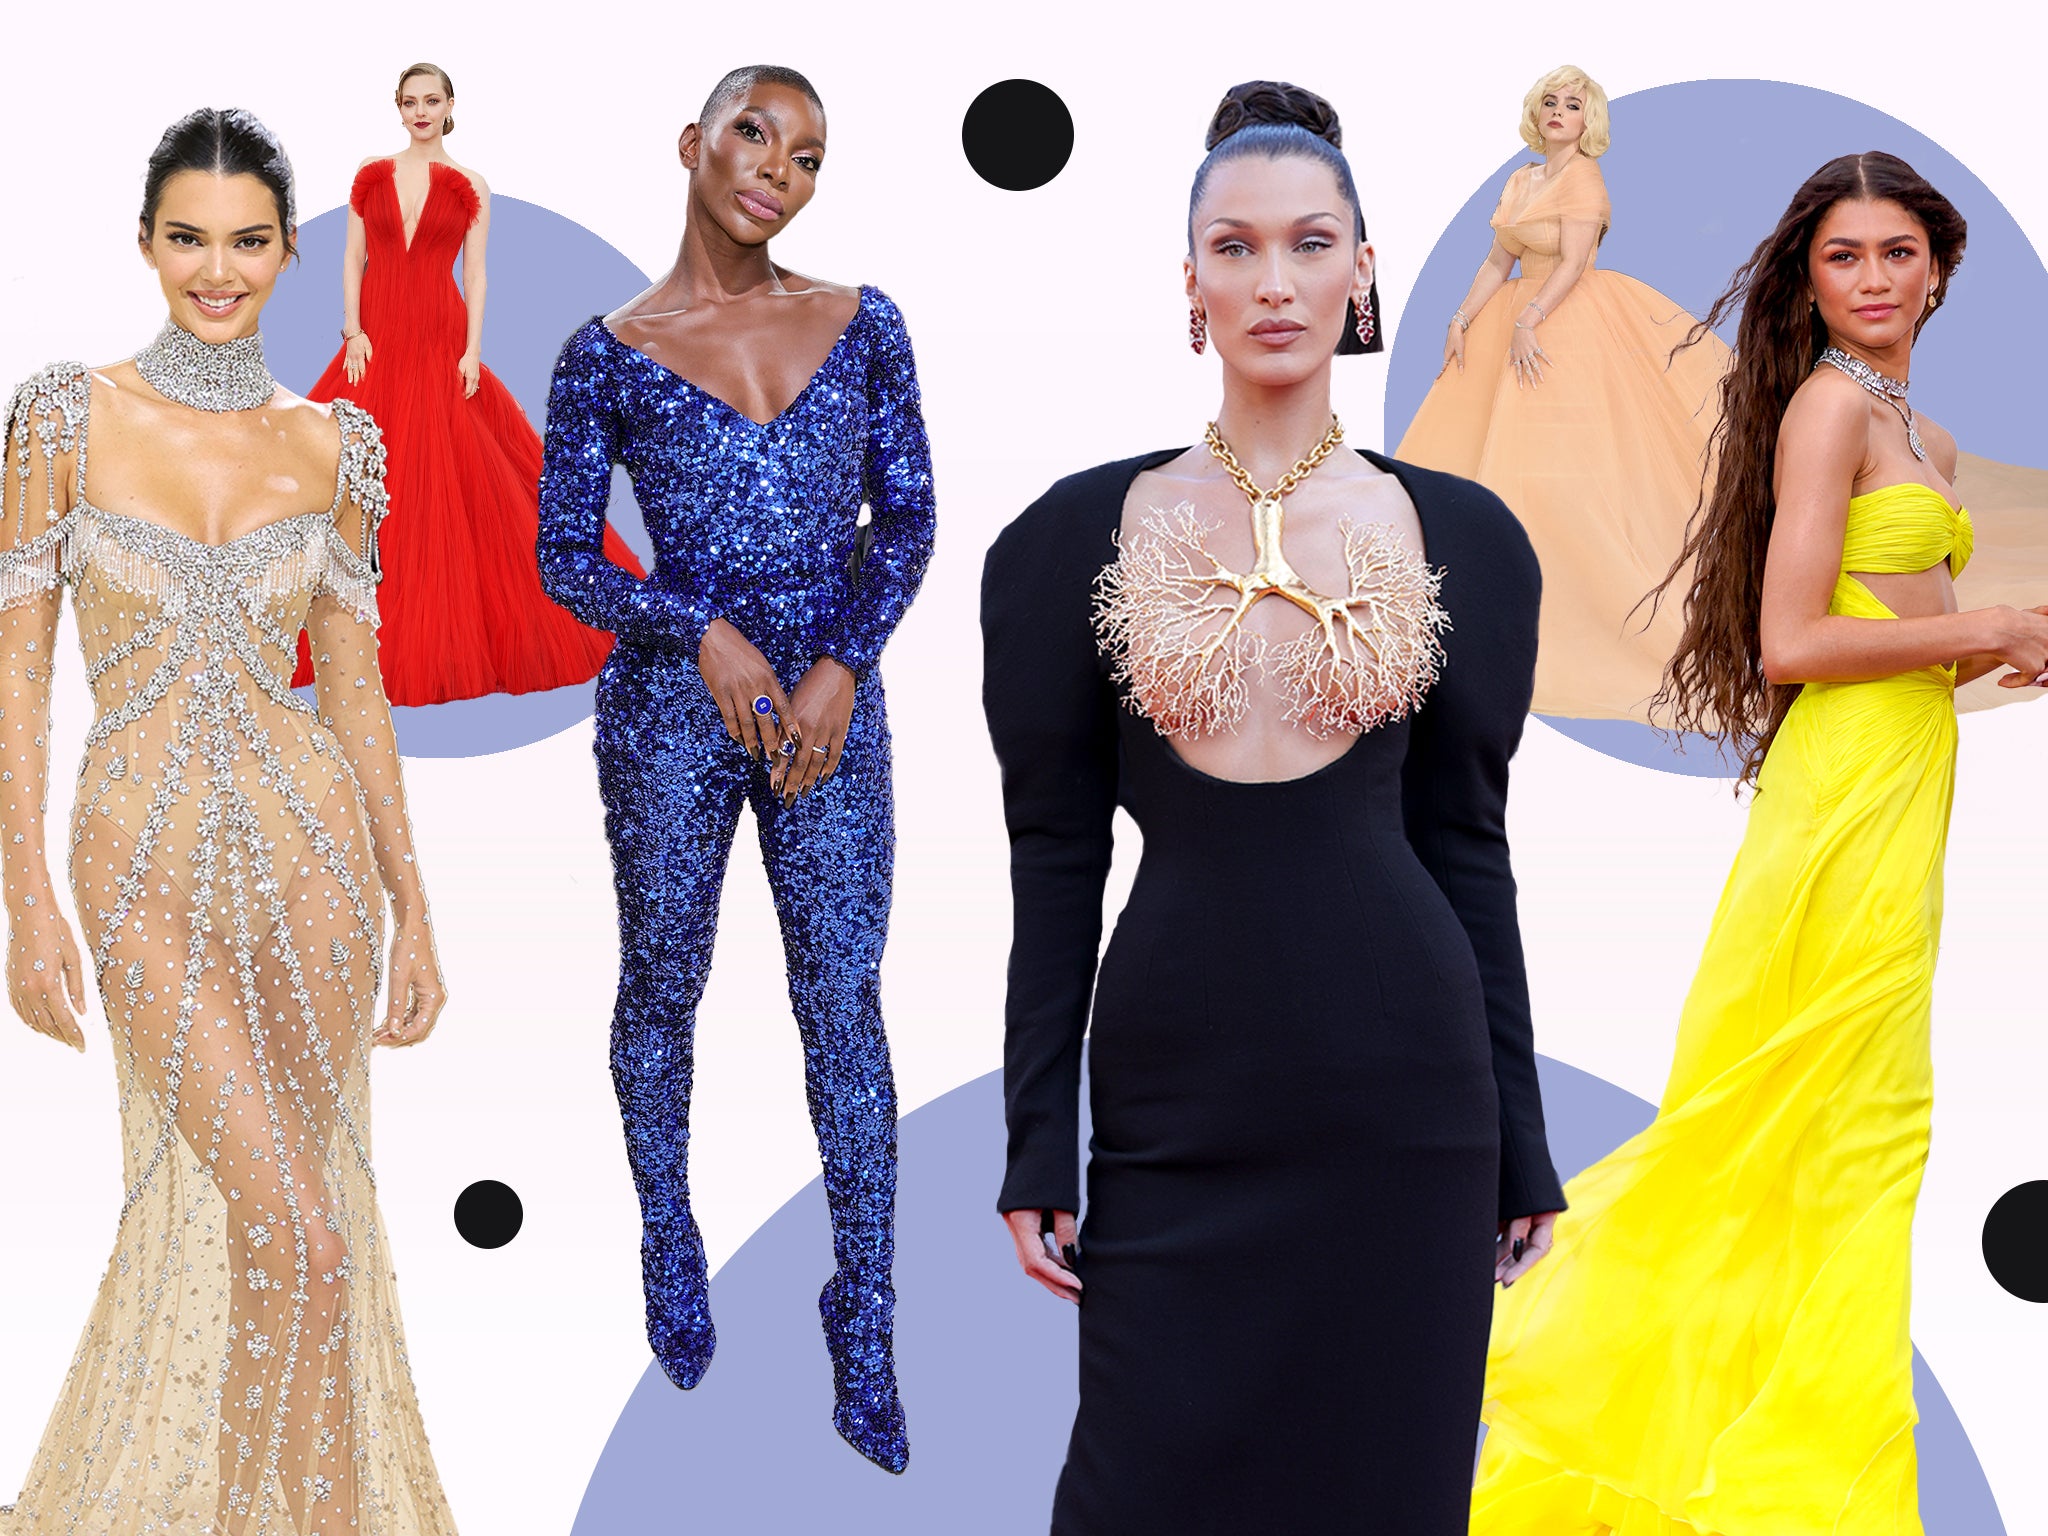 Naked dresses, lung necklaces and a faceless bodysuit: The best